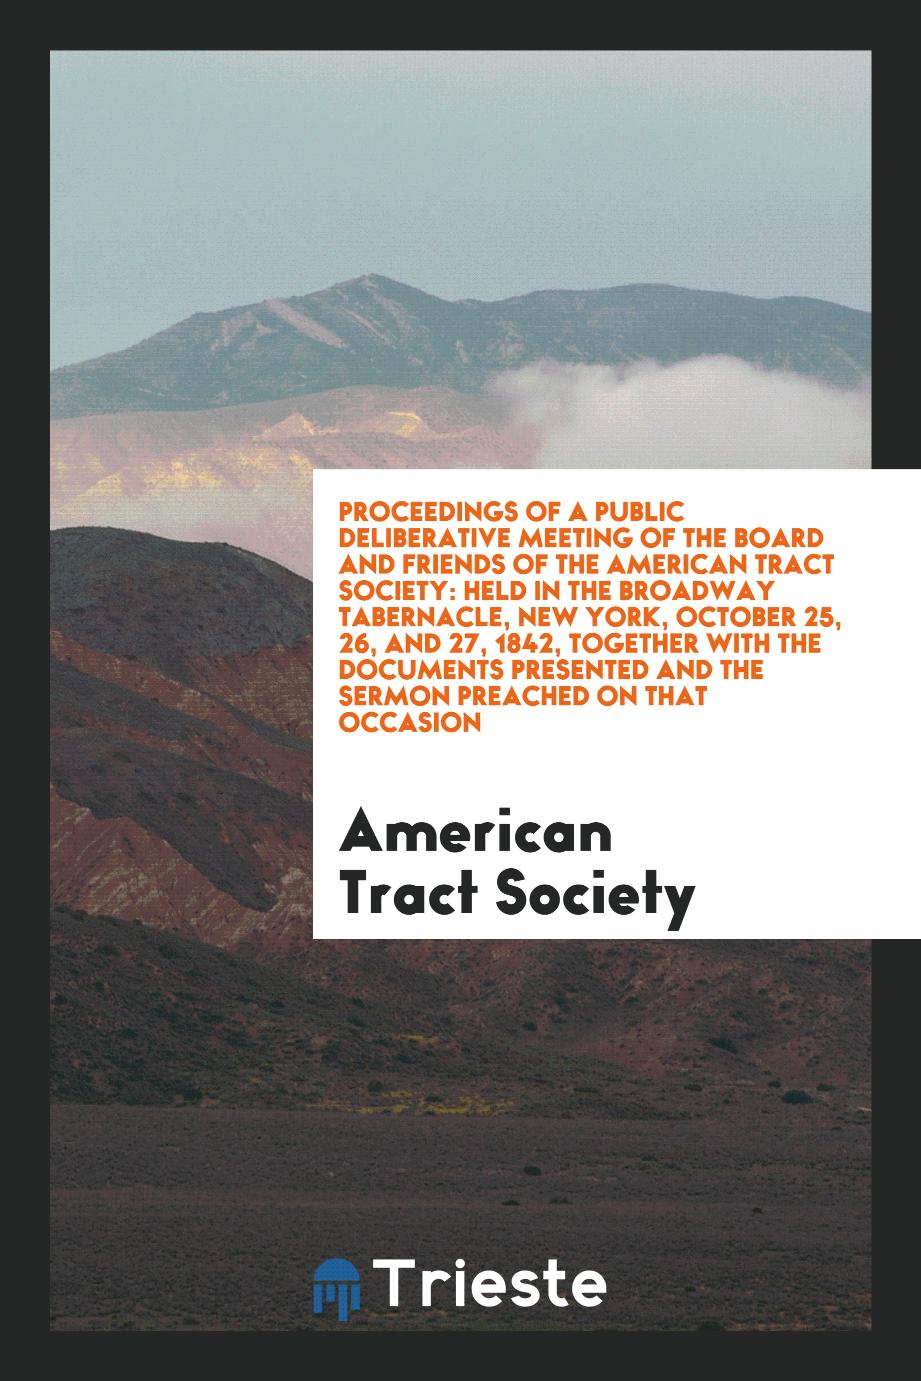 Proceedings of a Public Deliberative Meeting of the Board and Friends of the American Tract Society: Held in the Broadway Tabernacle, New York, October 25, 26, and 27, 1842, Together with the Documents Presented and the Sermon Preached on That Occasion